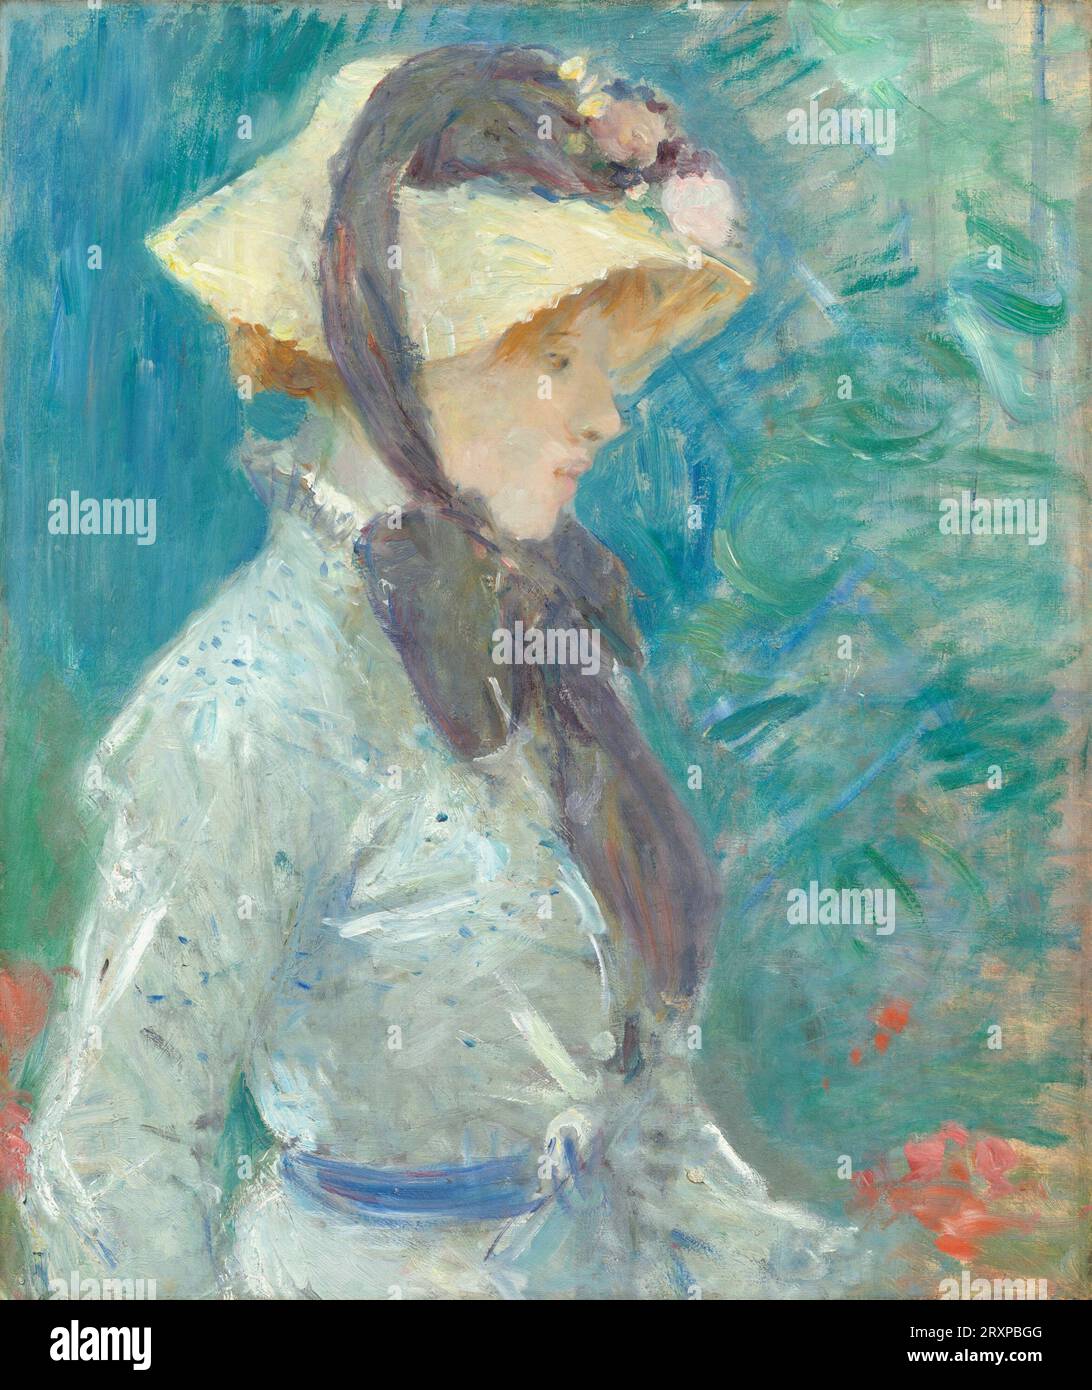 Title: Young Woman with a Straw Hat Creator: Berthe Morisot Year: 1884 Dimensions: 55.5 x 46.7 cm Average: Oil on canvas Location: National Gallery of Art, Washington, D.C. Content: This artwork portrays a young woman in a straw hat, evoking a sense of leisure and elegance. Morisot's skillful use of color and light exemplifies the Impressionist style, with the subject captured in a candid, unposed moment. The painting beautifully captures the essence of a warm, sunny day, and the subject's relaxed posture exudes a sense of serenity. Stock Photo